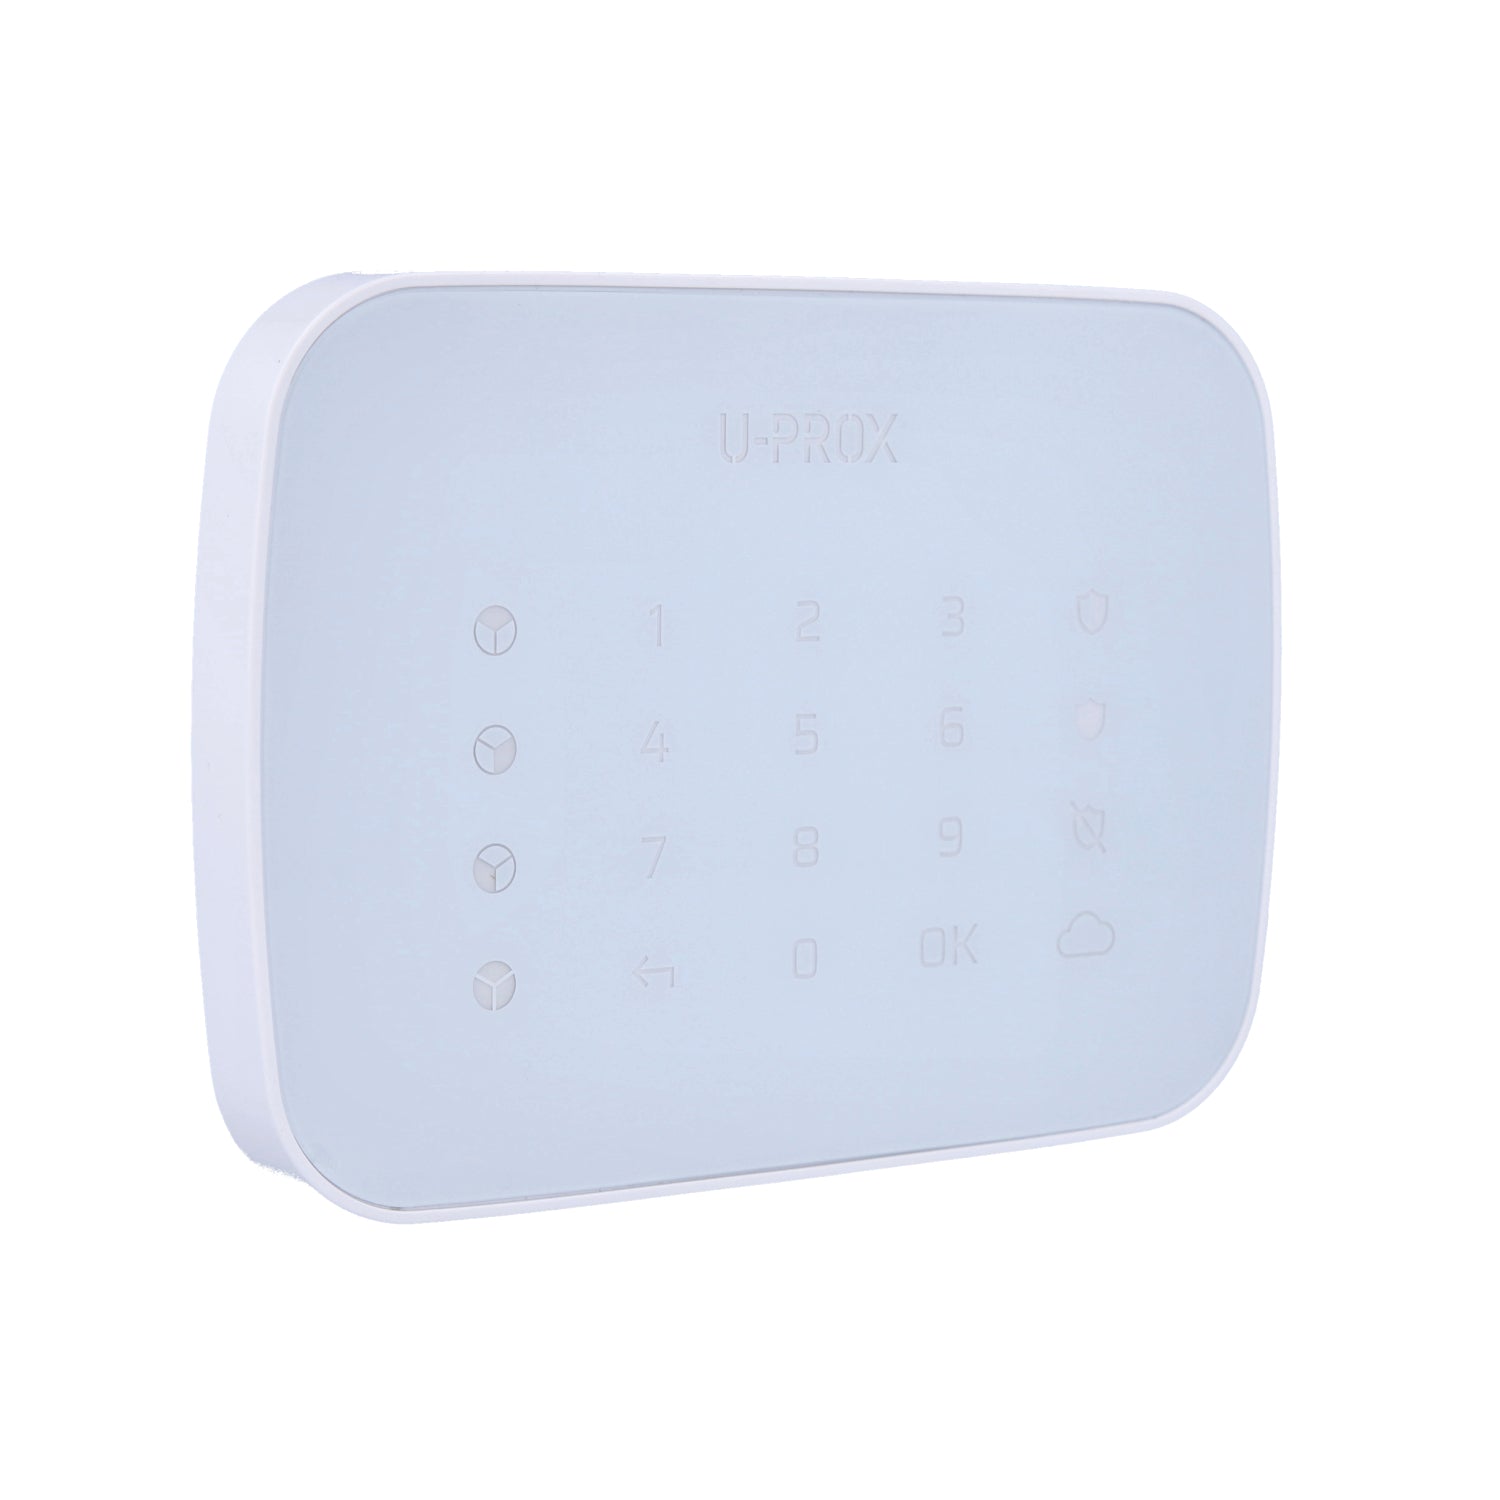 U-Prox Keypad G4 - Wireless Keypad with a touch surface and buttons for managing four groups - 0